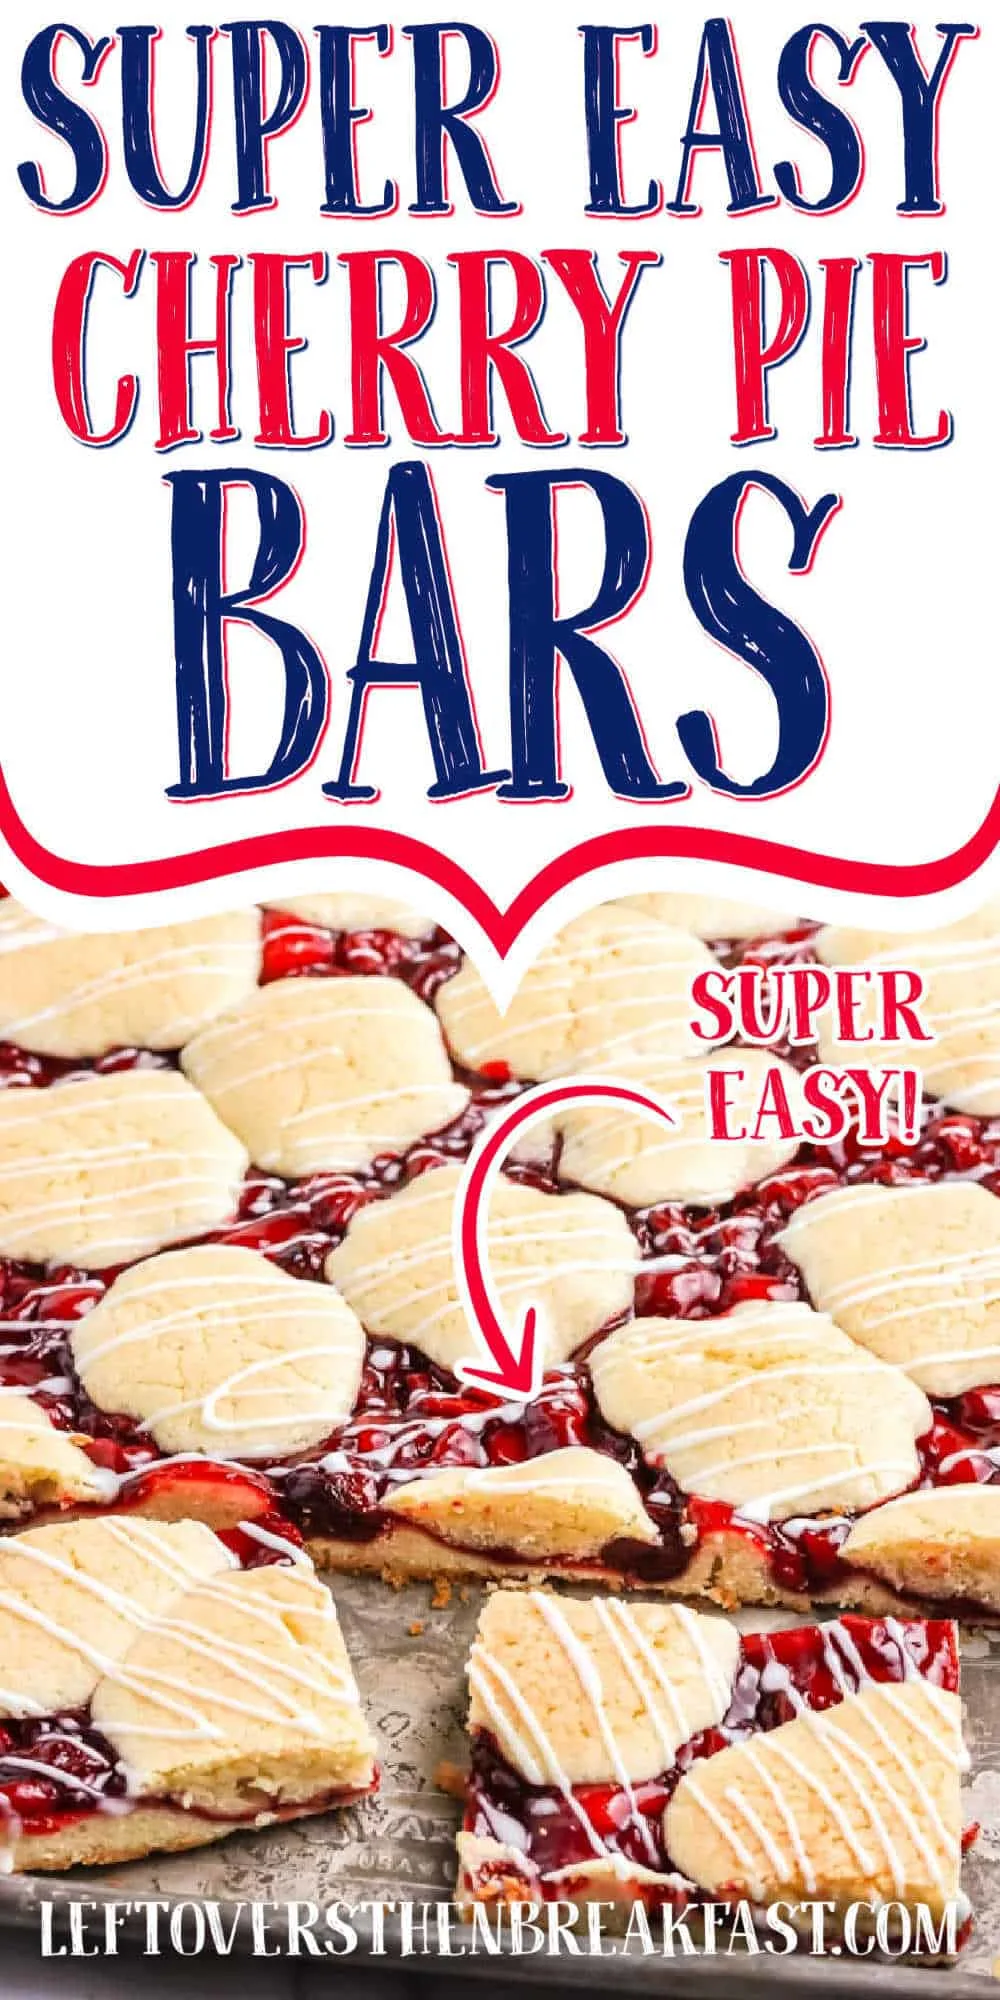 cherry pie cookie bars with text "super easy"